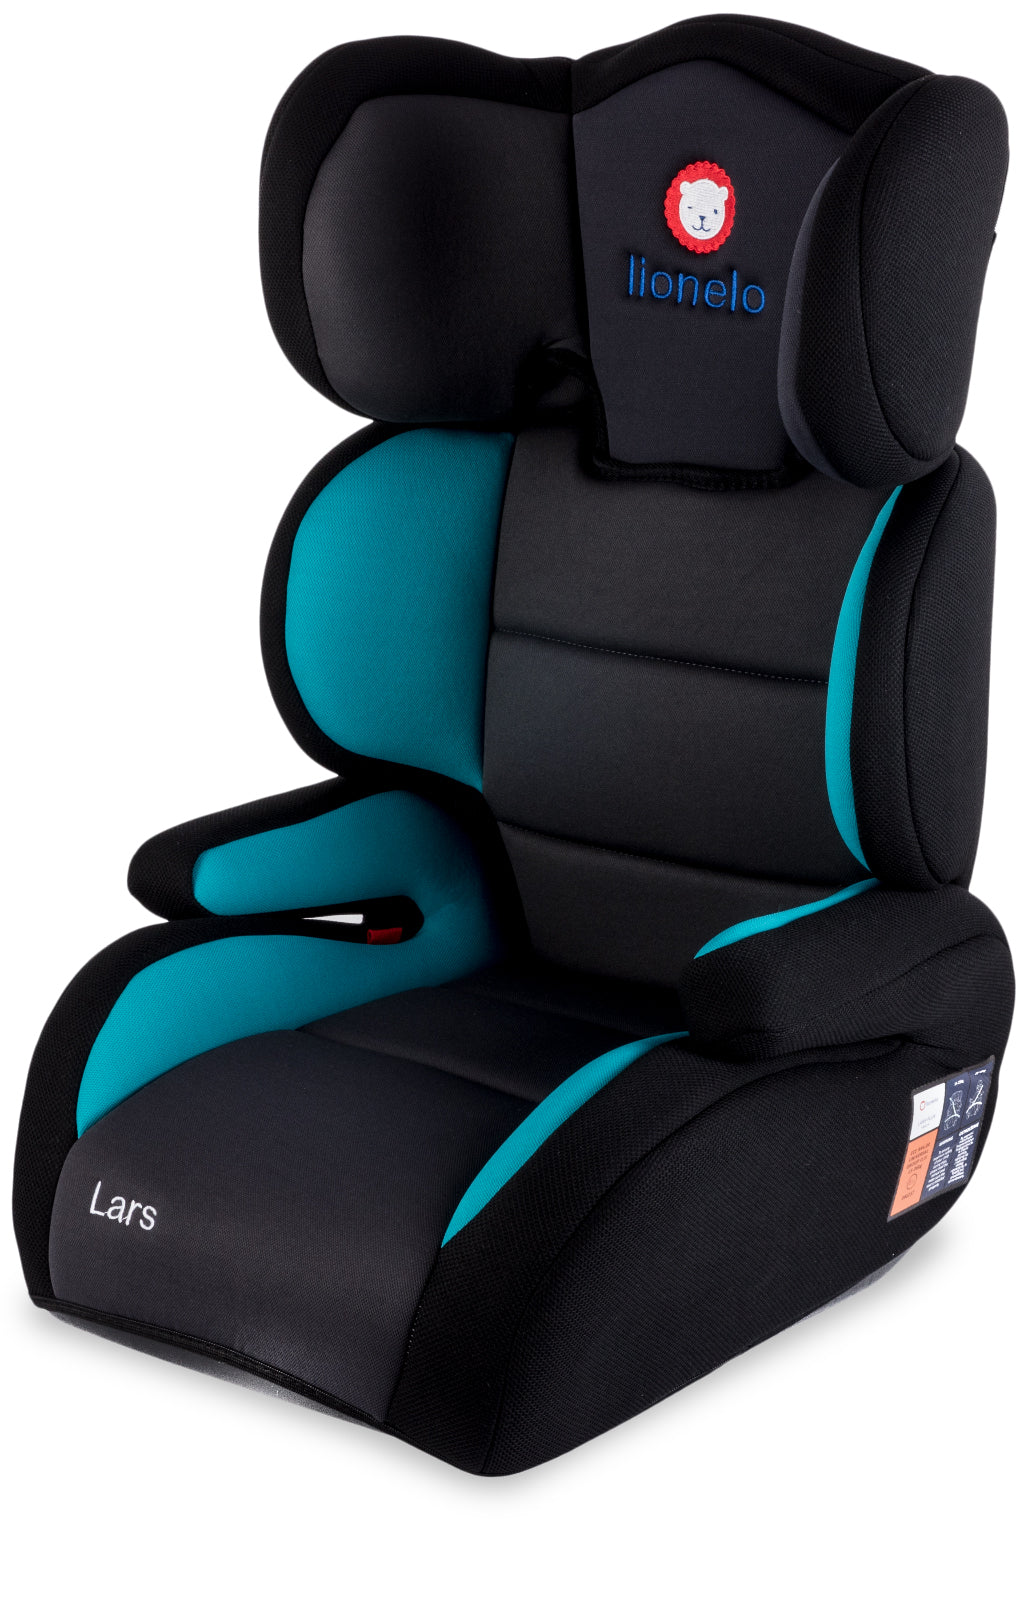 Baby car seat support safety booster kids child 15-36kg LARS LIONELO ECE R44/04 turquoise